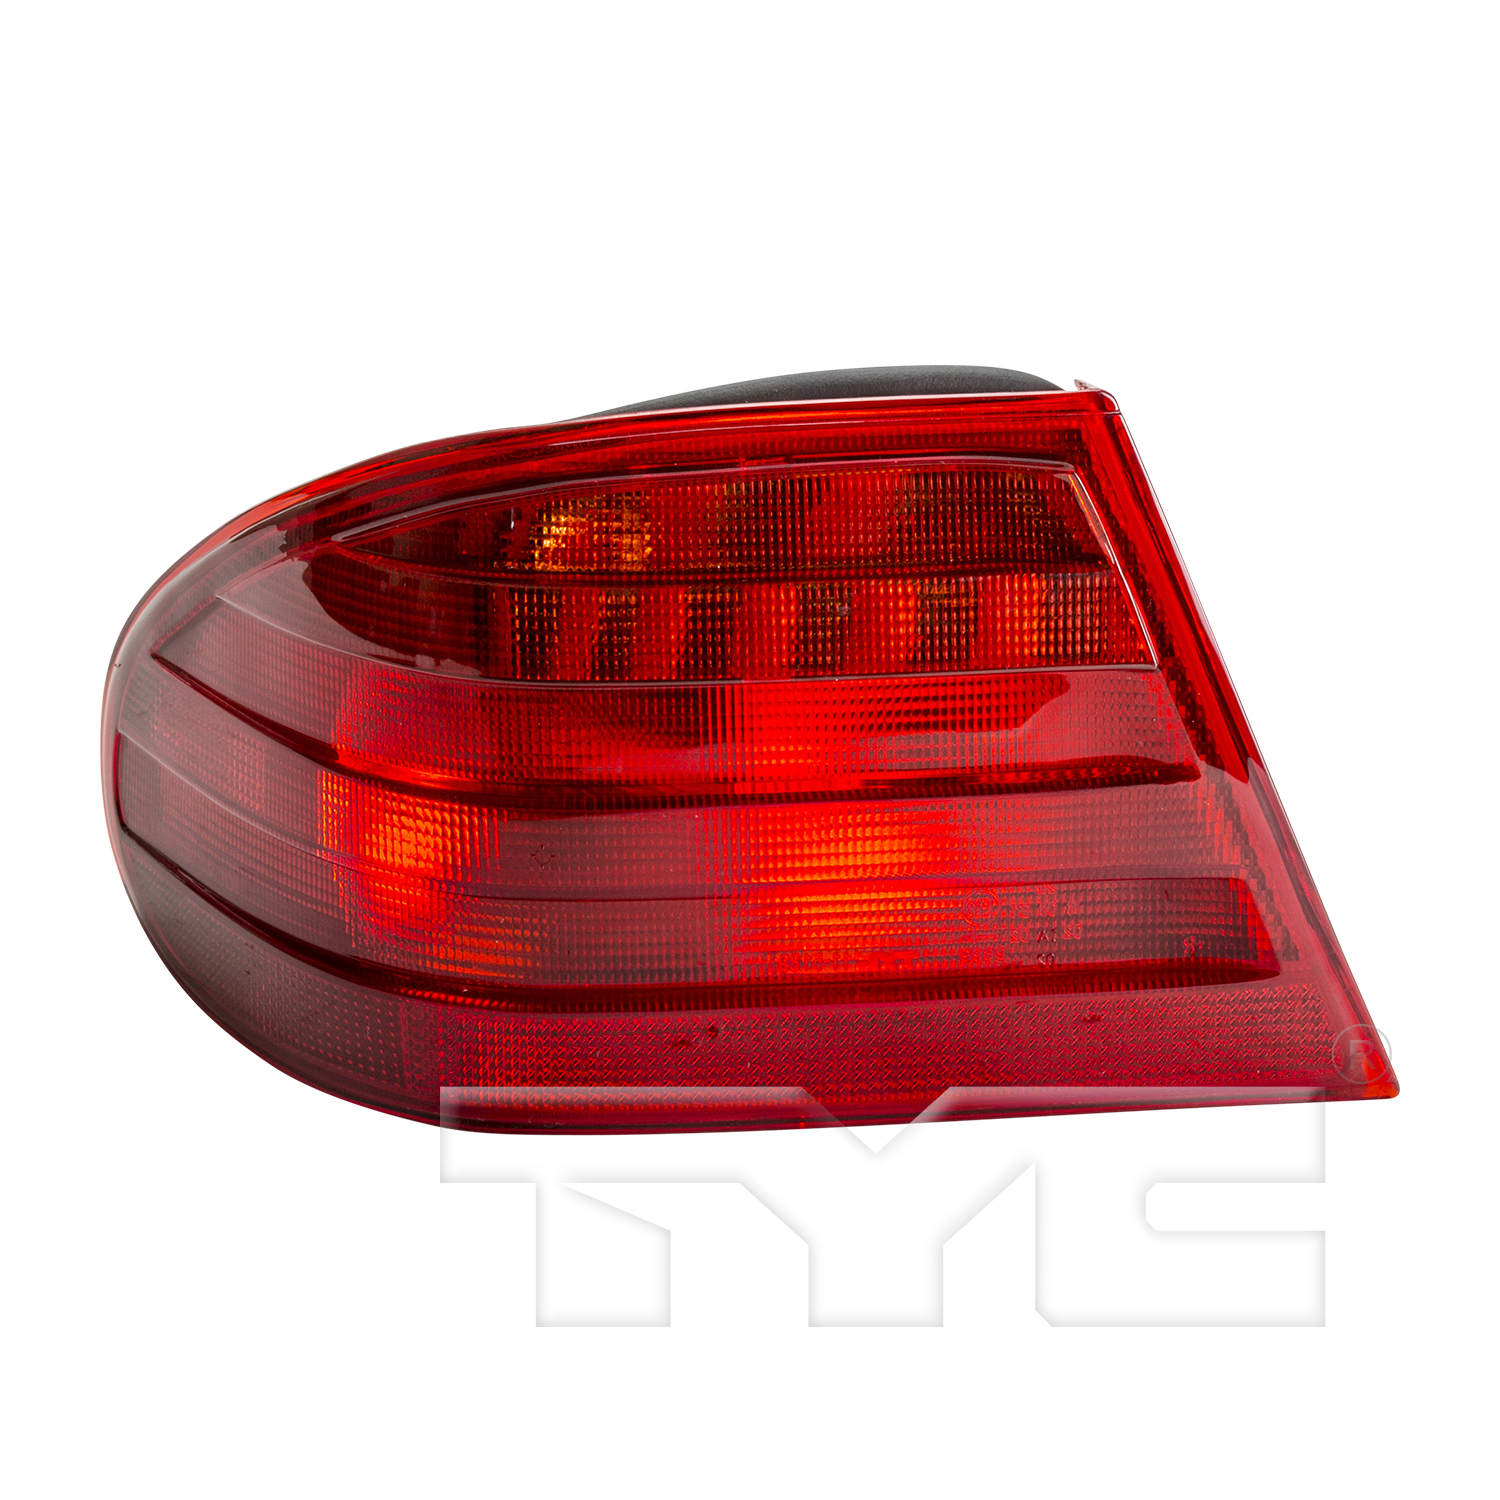 Aftermarket TAILLIGHTS for MERCEDES-BENZ - E320, E320,96-99,LT Taillamp assy outer